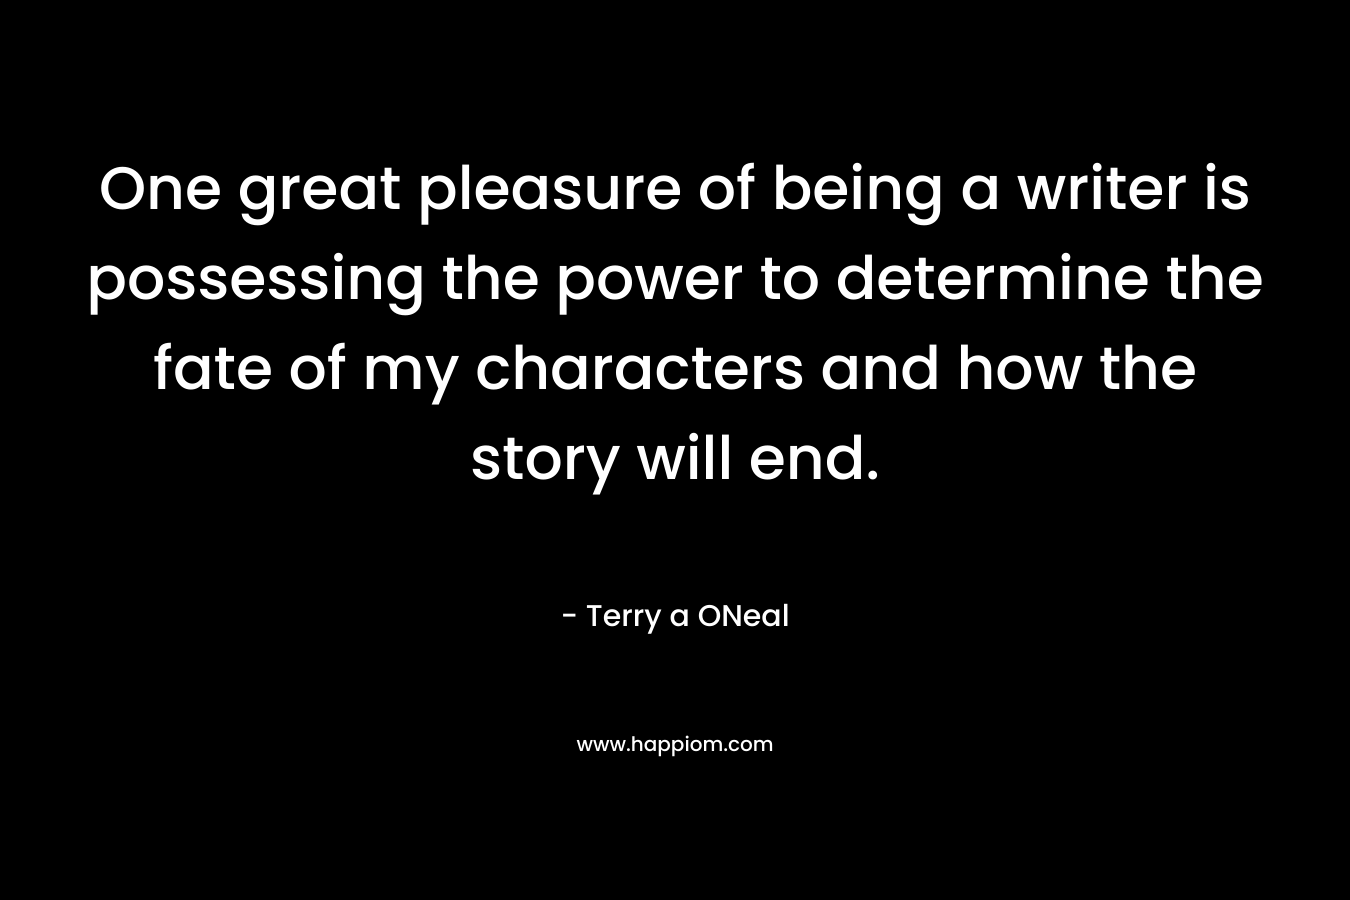 One great pleasure of being a writer is possessing the power to determine the fate of my characters and how the story will end. – Terry a ONeal